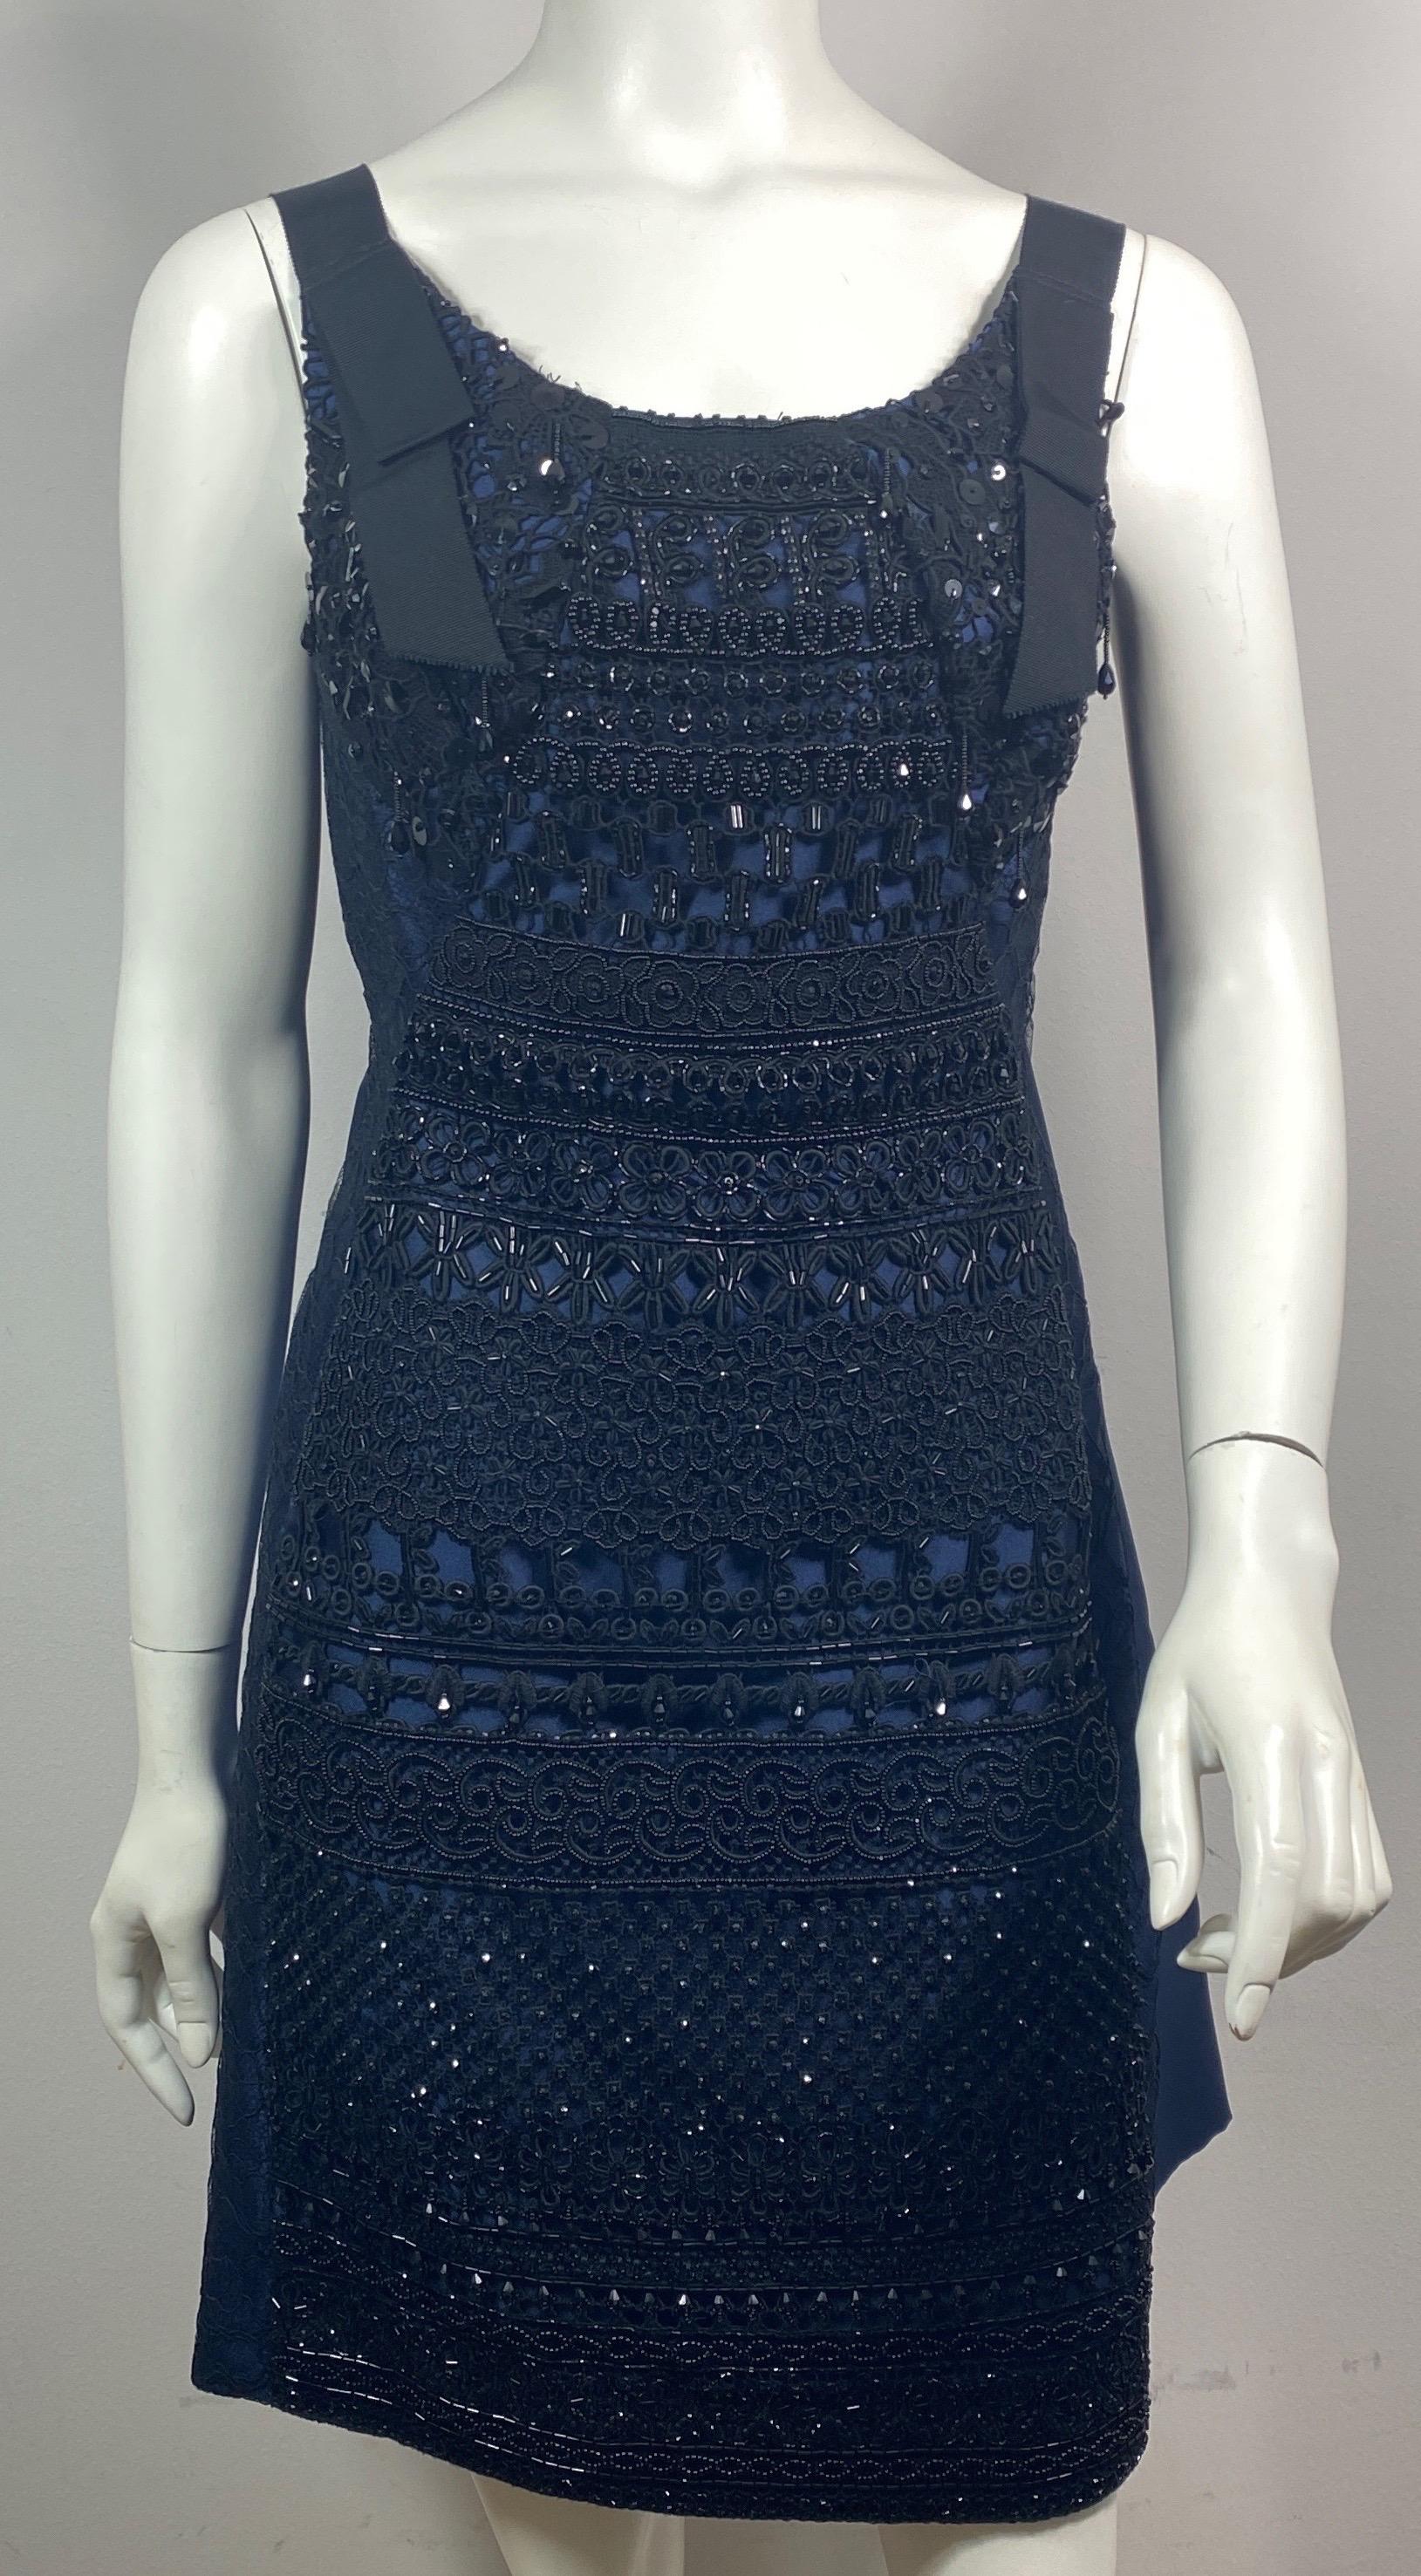 Oscar de La Renta Runway Resort 2016 Navy and Black Heavily Beaded Dress-Size 4 This stunning runway dress was look # in the Oscar De la Renta Resort 2016 Collection. The dress is a dark navy blue textured silk charmeuse with a top layer of a